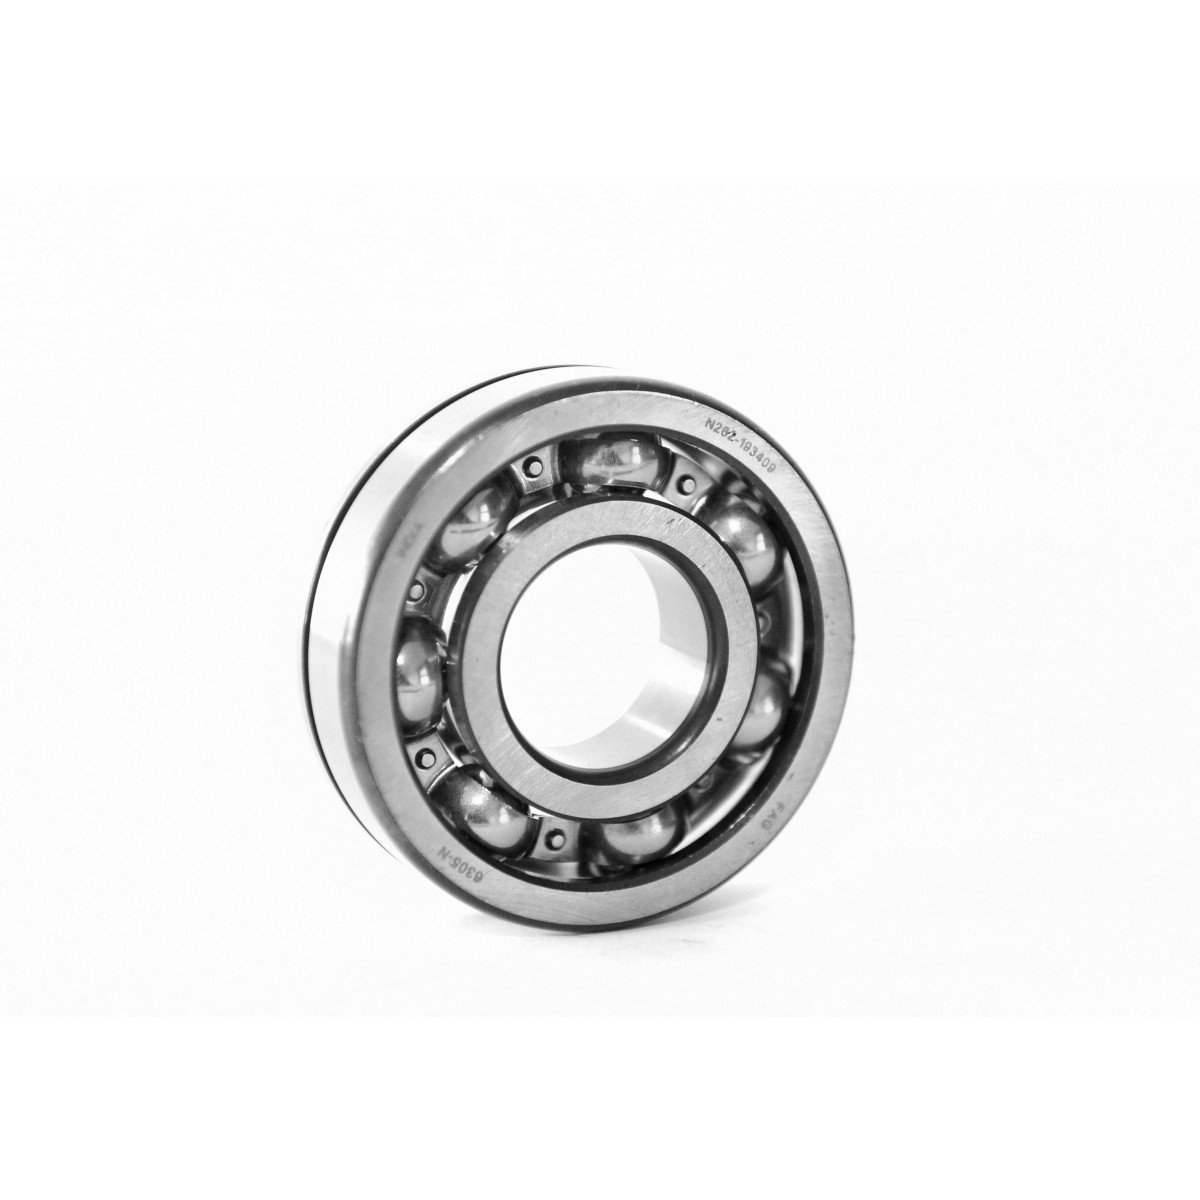 Gearbox bearing for Mitsubishi VST MT180 / 222/270